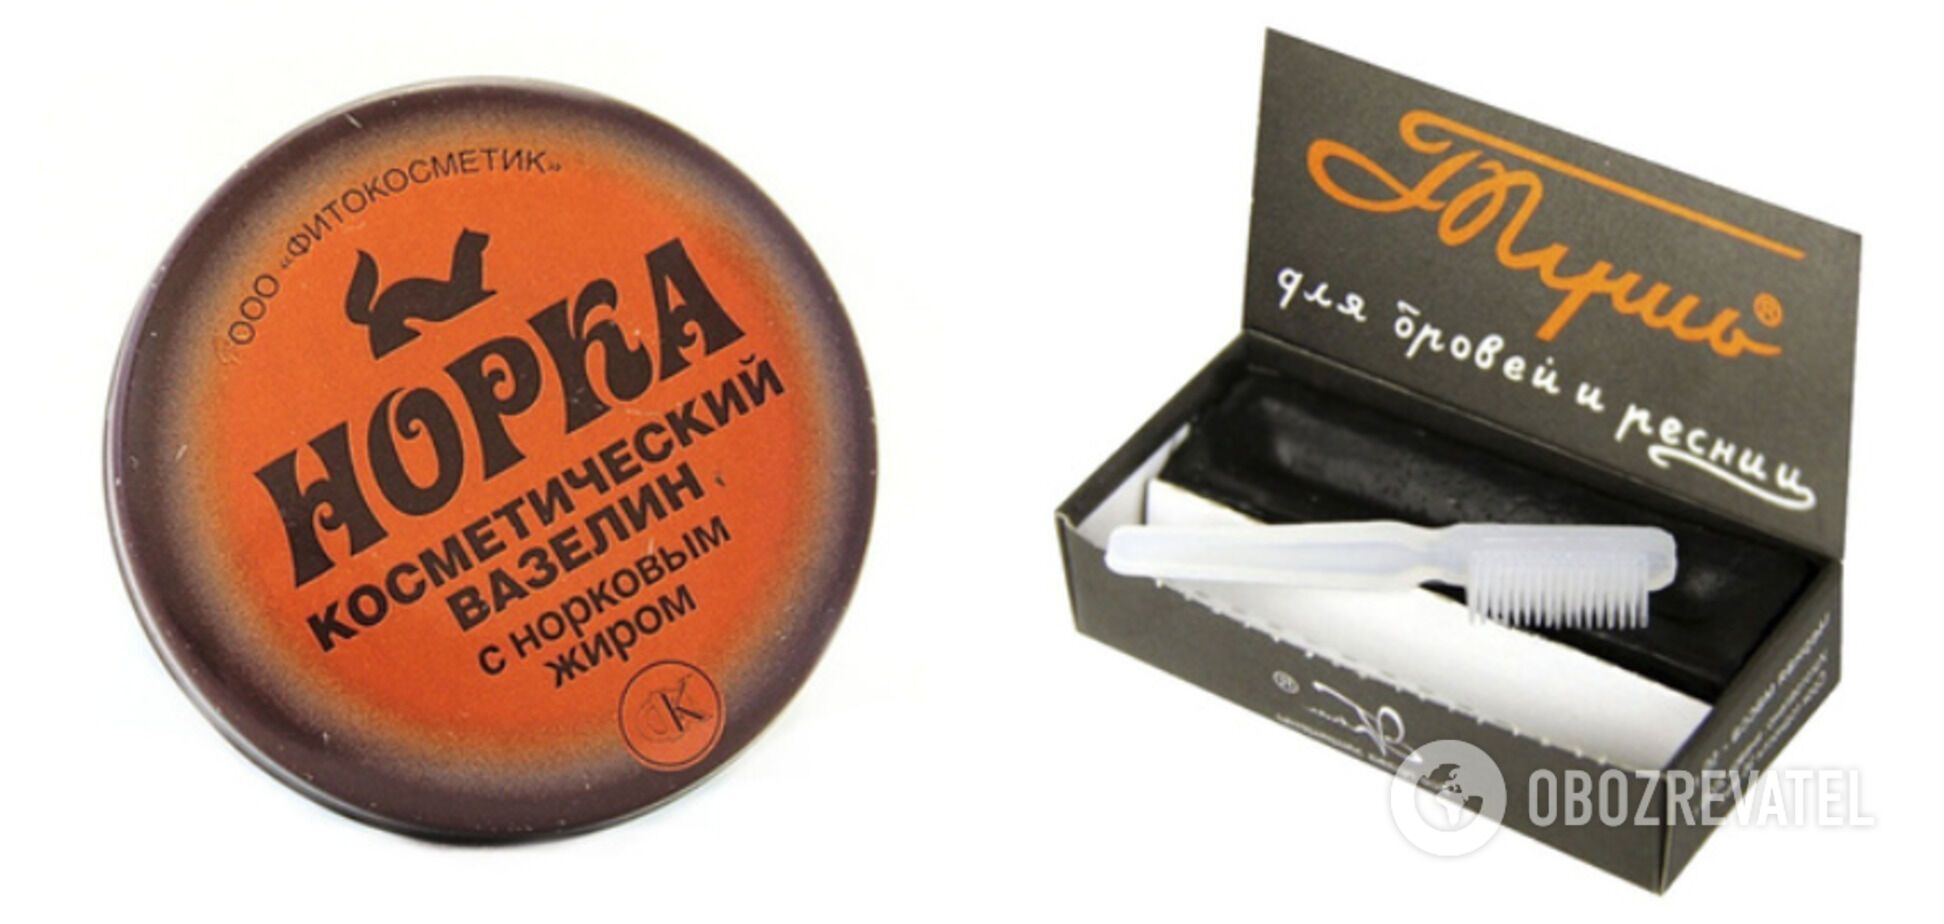 Chalk instead of eye shadow and a knife for curling eyelashes: how women in the USSR used to make up